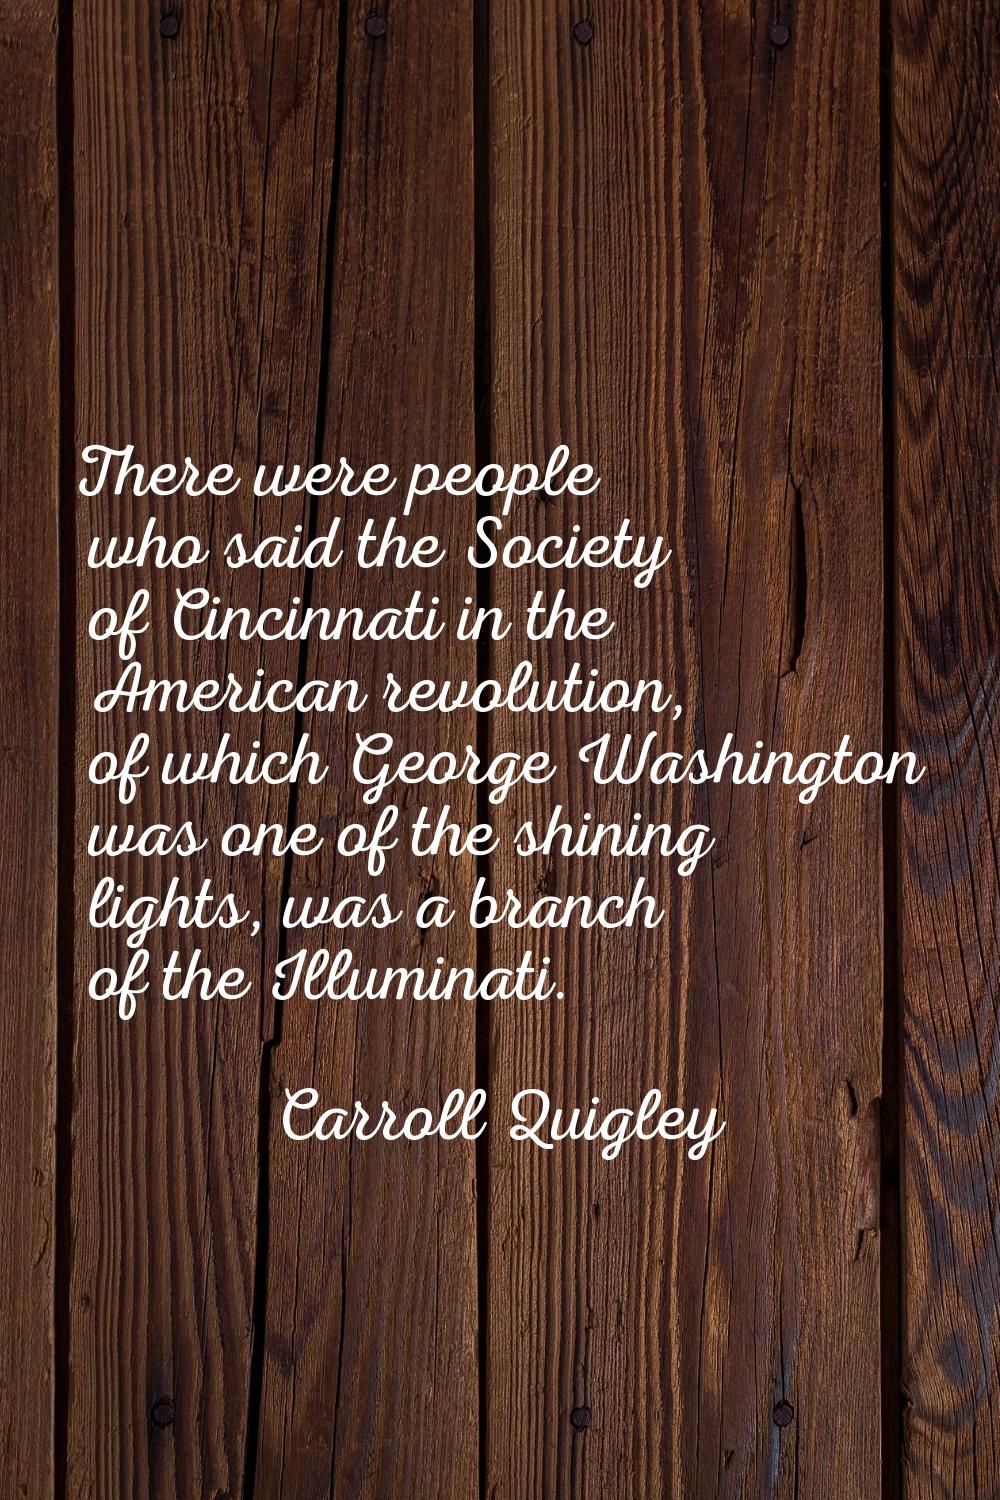 There were people who said the Society of Cincinnati in the American revolution, of which George Wa